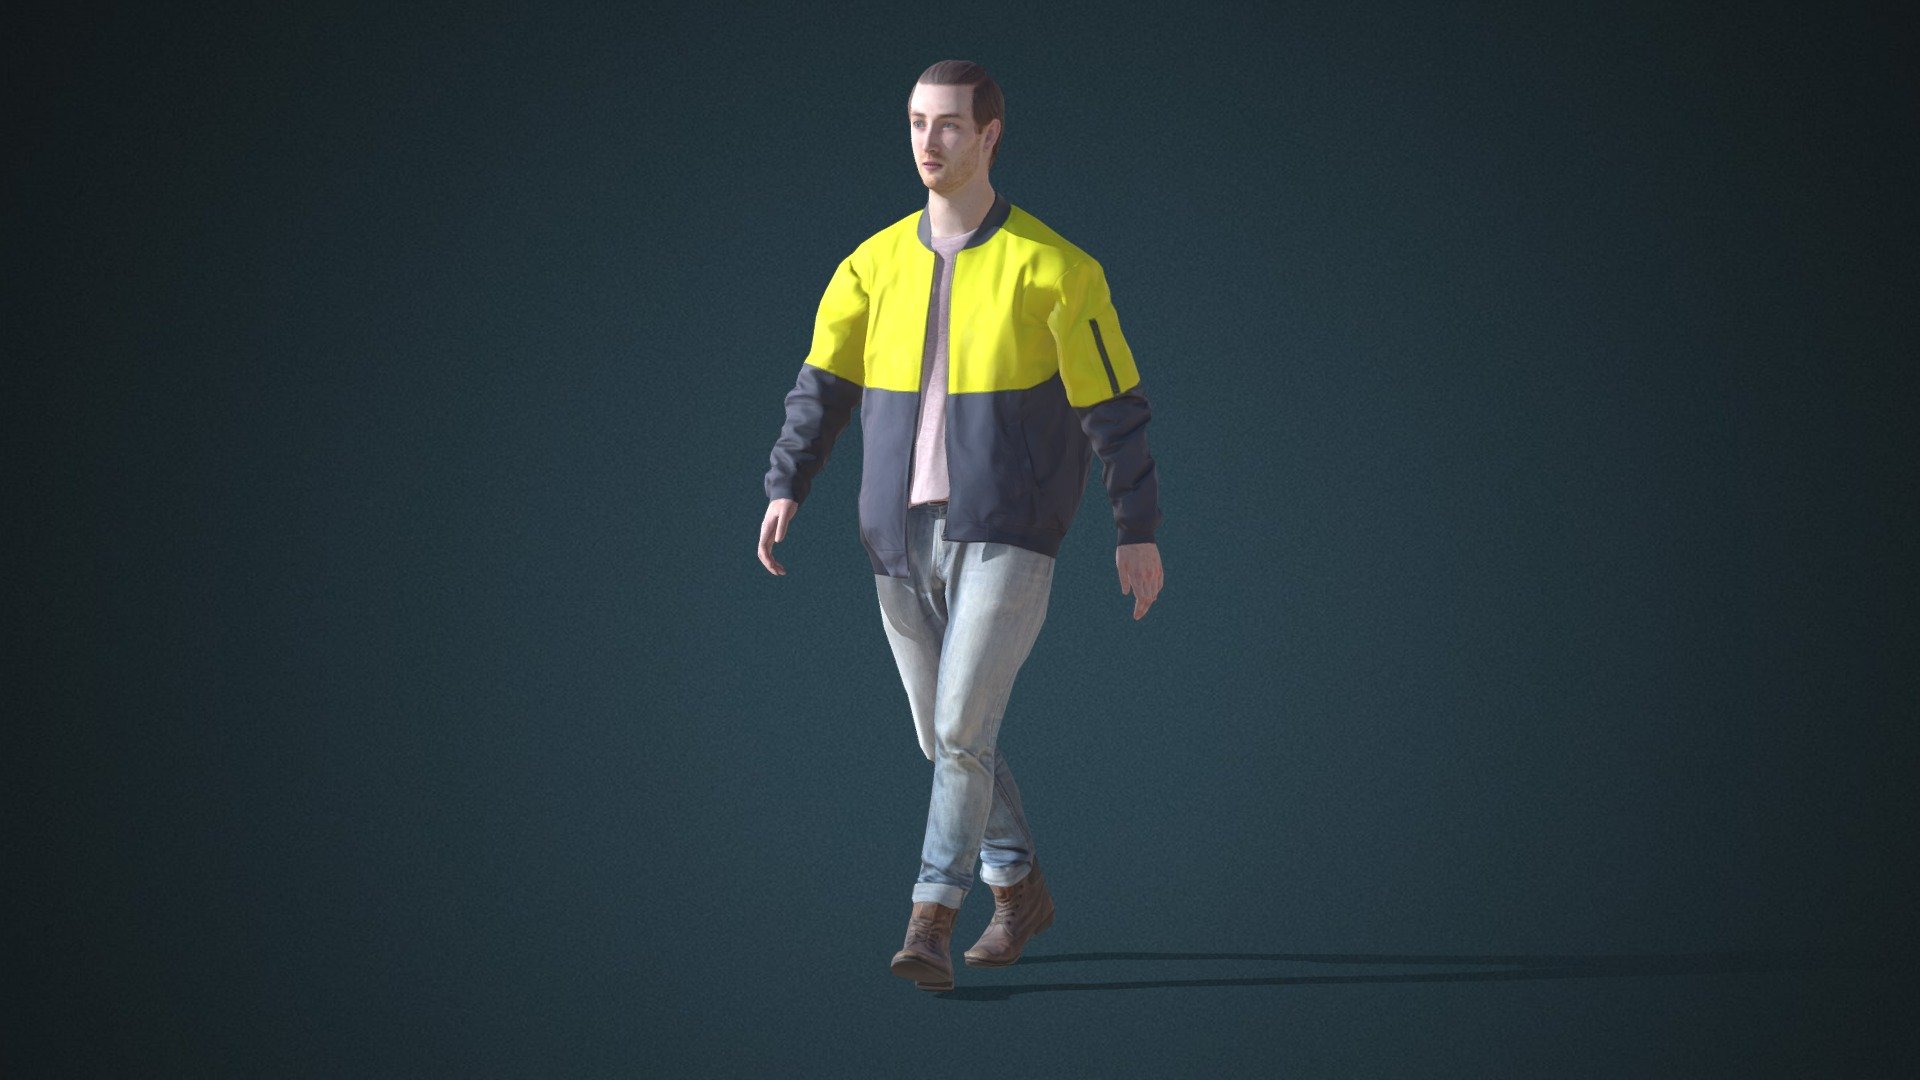 Do you like this model?  Free Download more models, motions and auto rigging tool AccuRIG (Value: $150+) on ActorCore
 

This model includes 2 mocap animations: Modern_M_Idle,Male_walk. Get more free motions

Design for high-performance crowd animation.

Buy full pack and Save 20%+: Young Fashion Vol.3


SPECIFICATIONS

✔ Geometry : 7K~10K Quads, one mesh

✔ Material : One material with changeable colors.

✔ Texture Resolution : 4K

✔ Shader : PBR, Diffuse, Normal, Roughness, Metallic, Opacity

✔ Rigged : Facial and Body (shoulders, fingers, toes, eyeballs, jaw)

✔ Blendshape : 122 for facial expressions and lipsync

✔ Compatible with iClone AccuLips, Facial ExPlus, and traditional lip-sync.


About Reallusion ActorCore

ActorCore offers the highest quality 3D asset libraries for mocap motions and animated 3D humans for crowd rendering 3d model